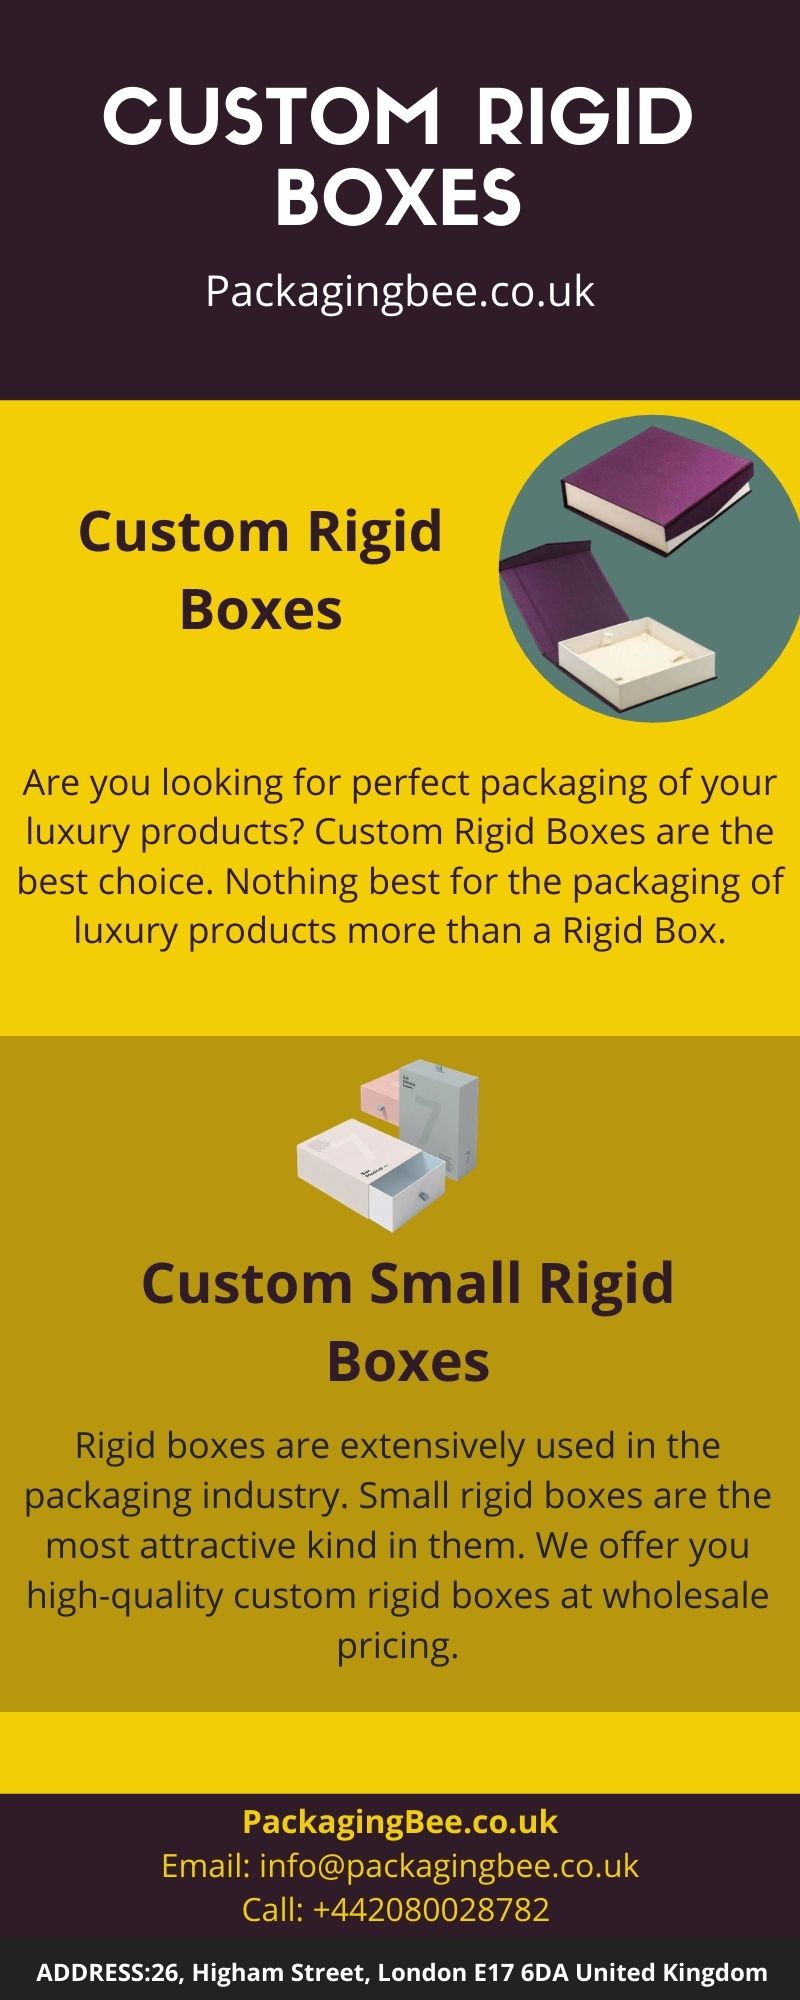 RIGID BOXES: THEIR TYPES AND BENEFITS